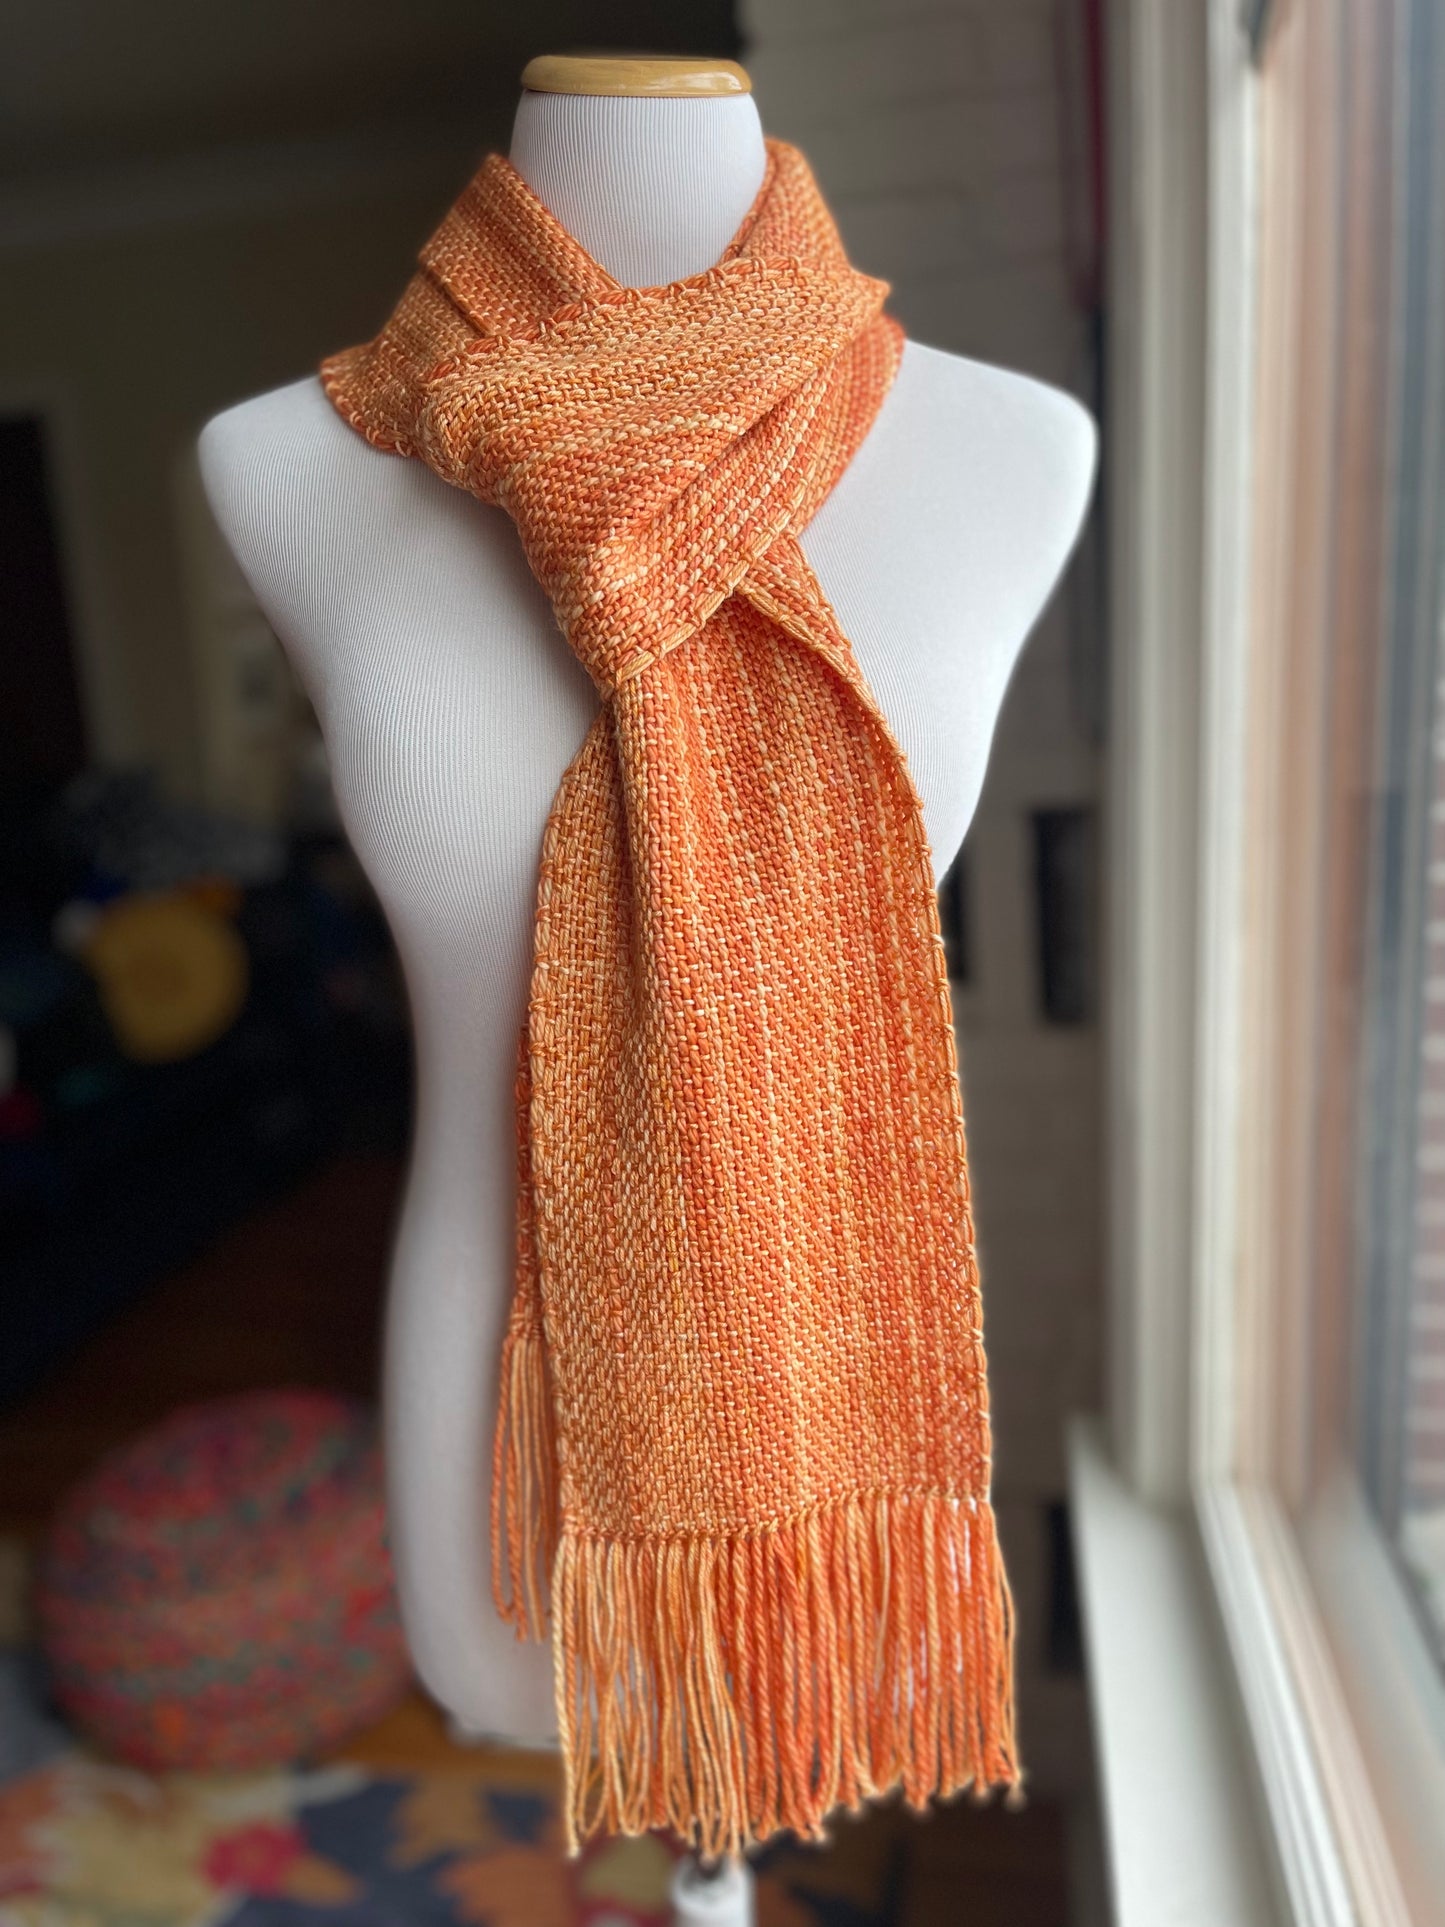 Ginger Monochrome Handwoven Scarf by The Village Weaver